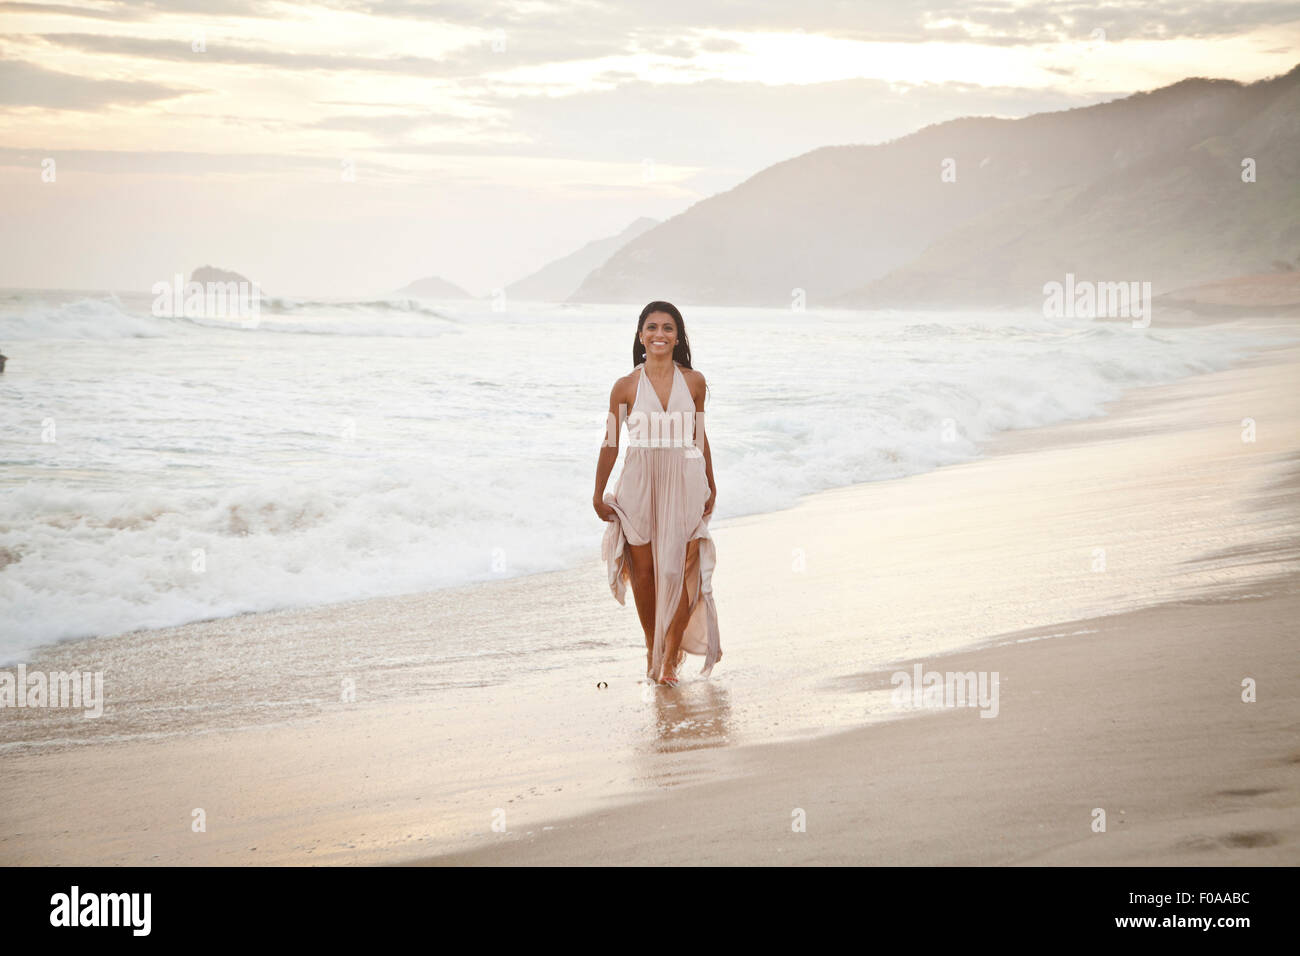 Mid adult woman walking along beach Banque D'Images